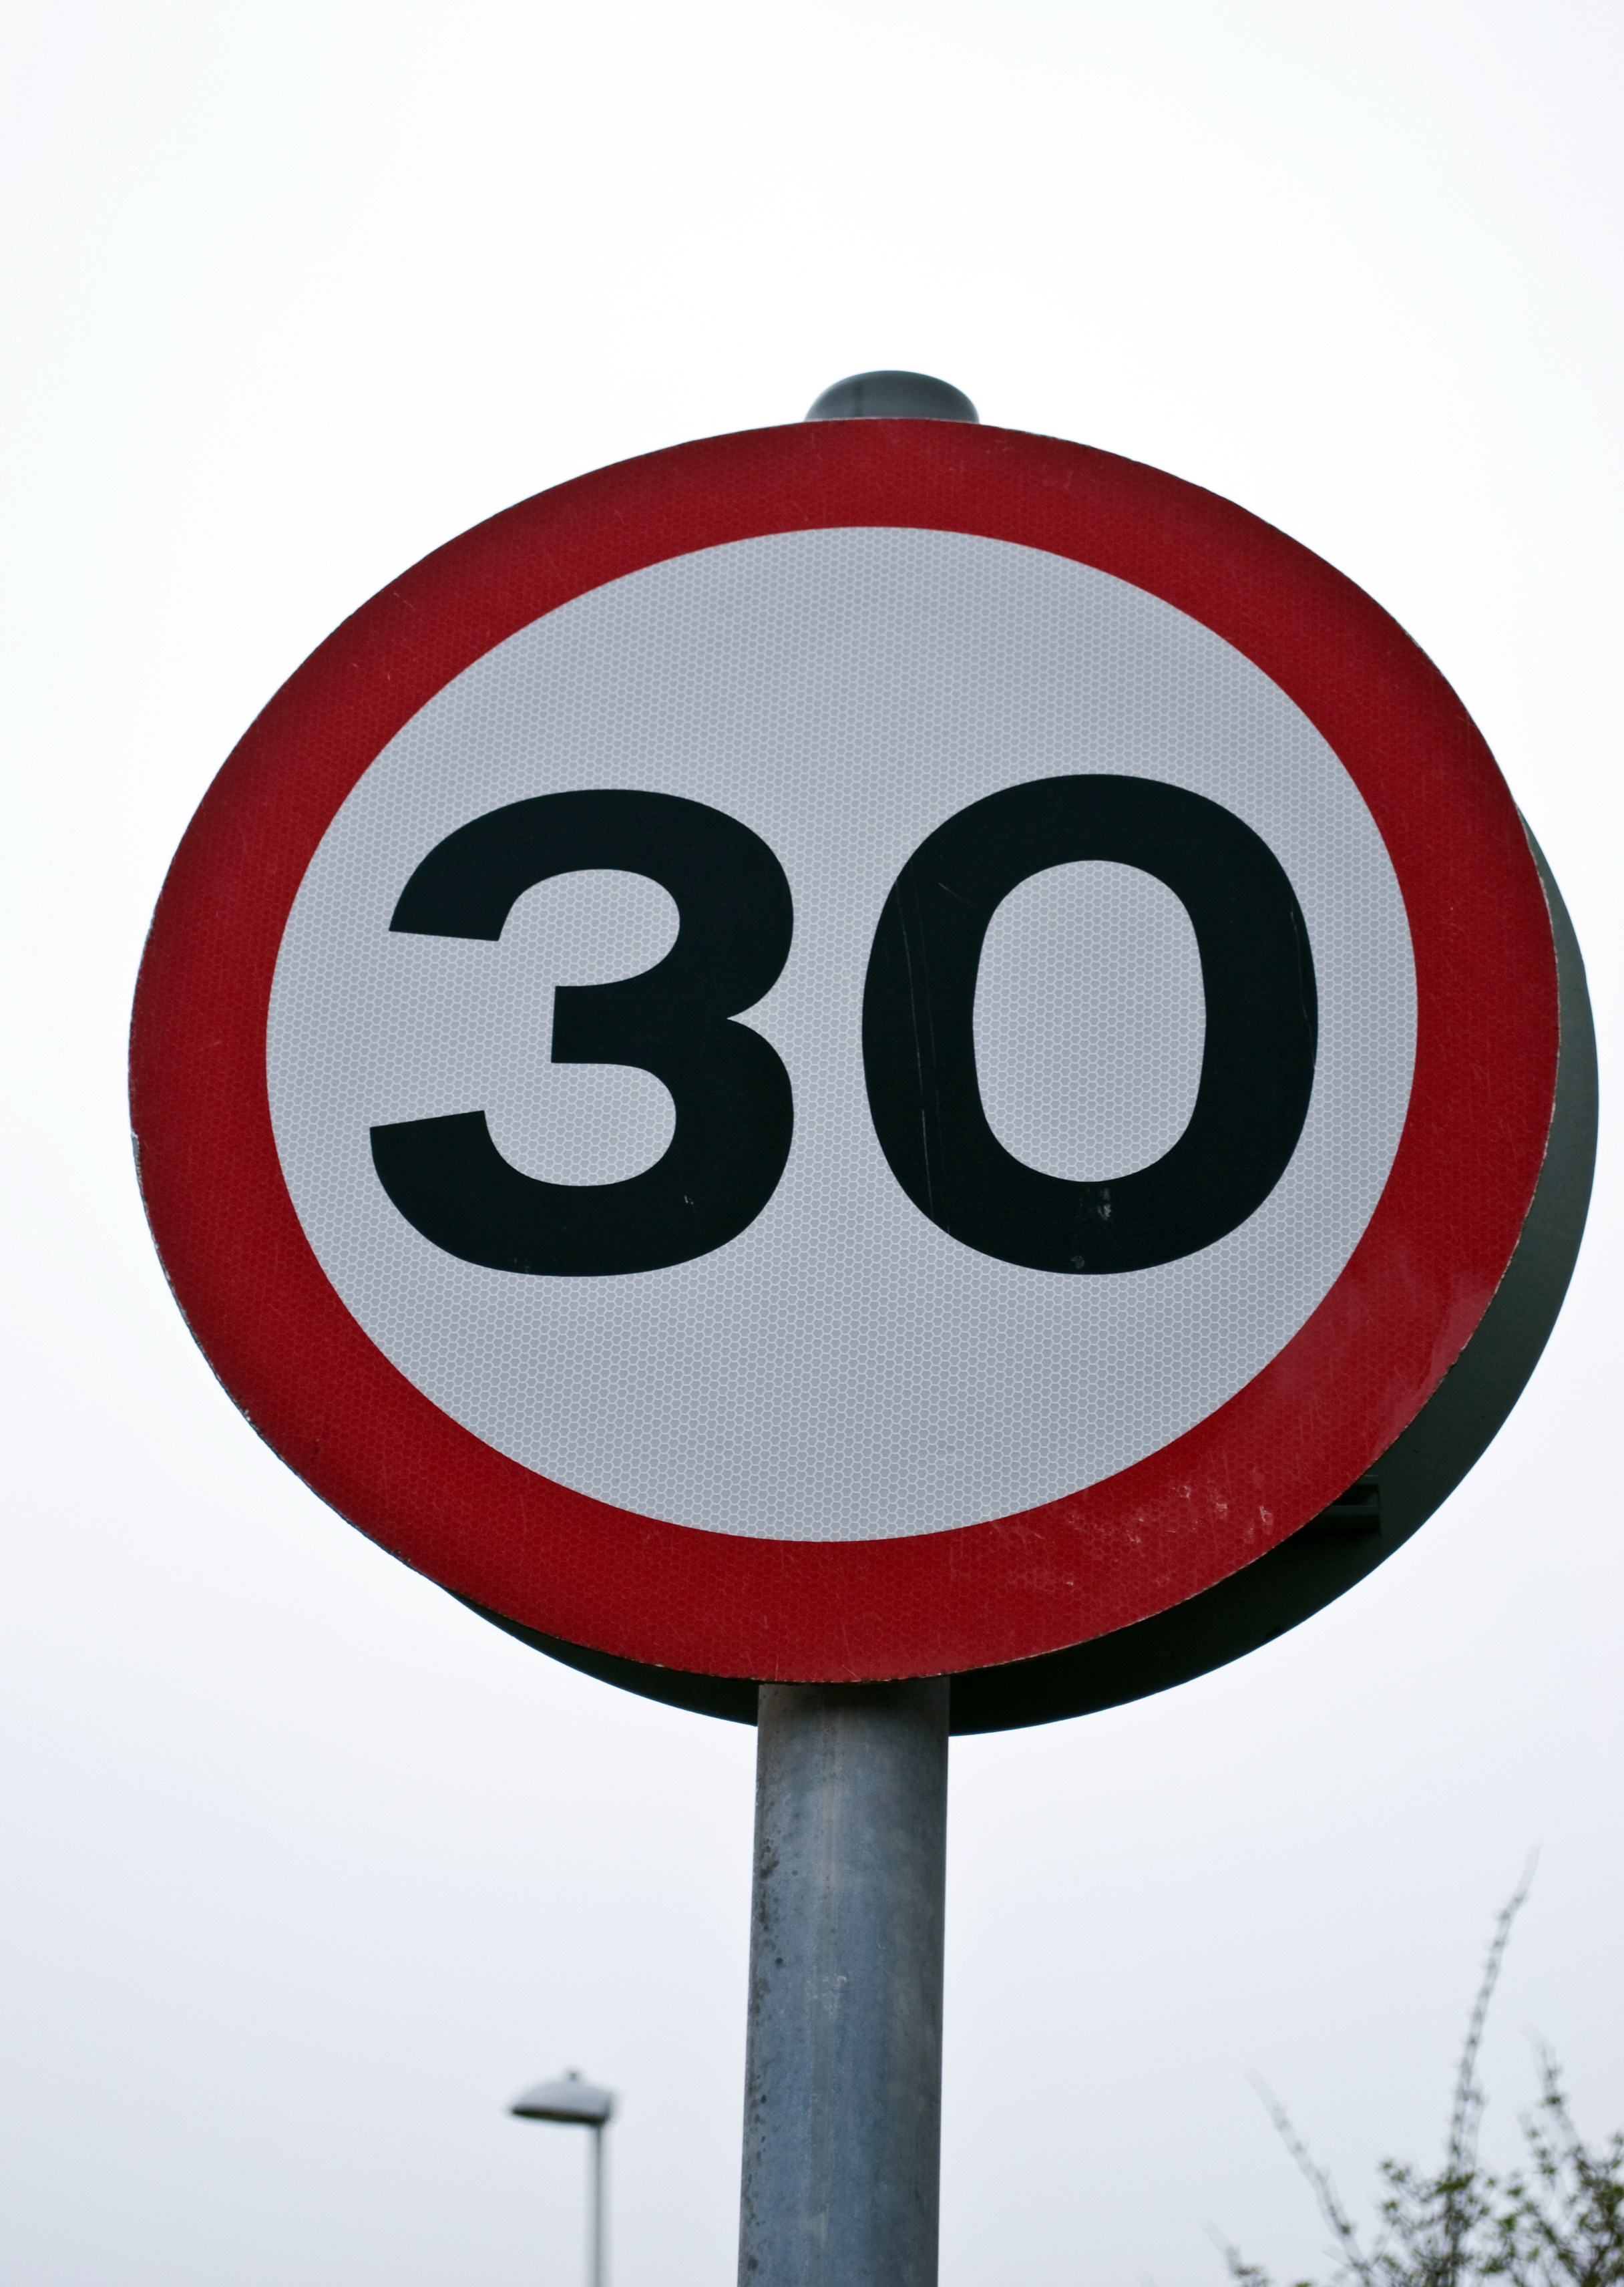 30 Mph sign | Free Early Years & Primary Teaching Resources (EYFS & KS1)